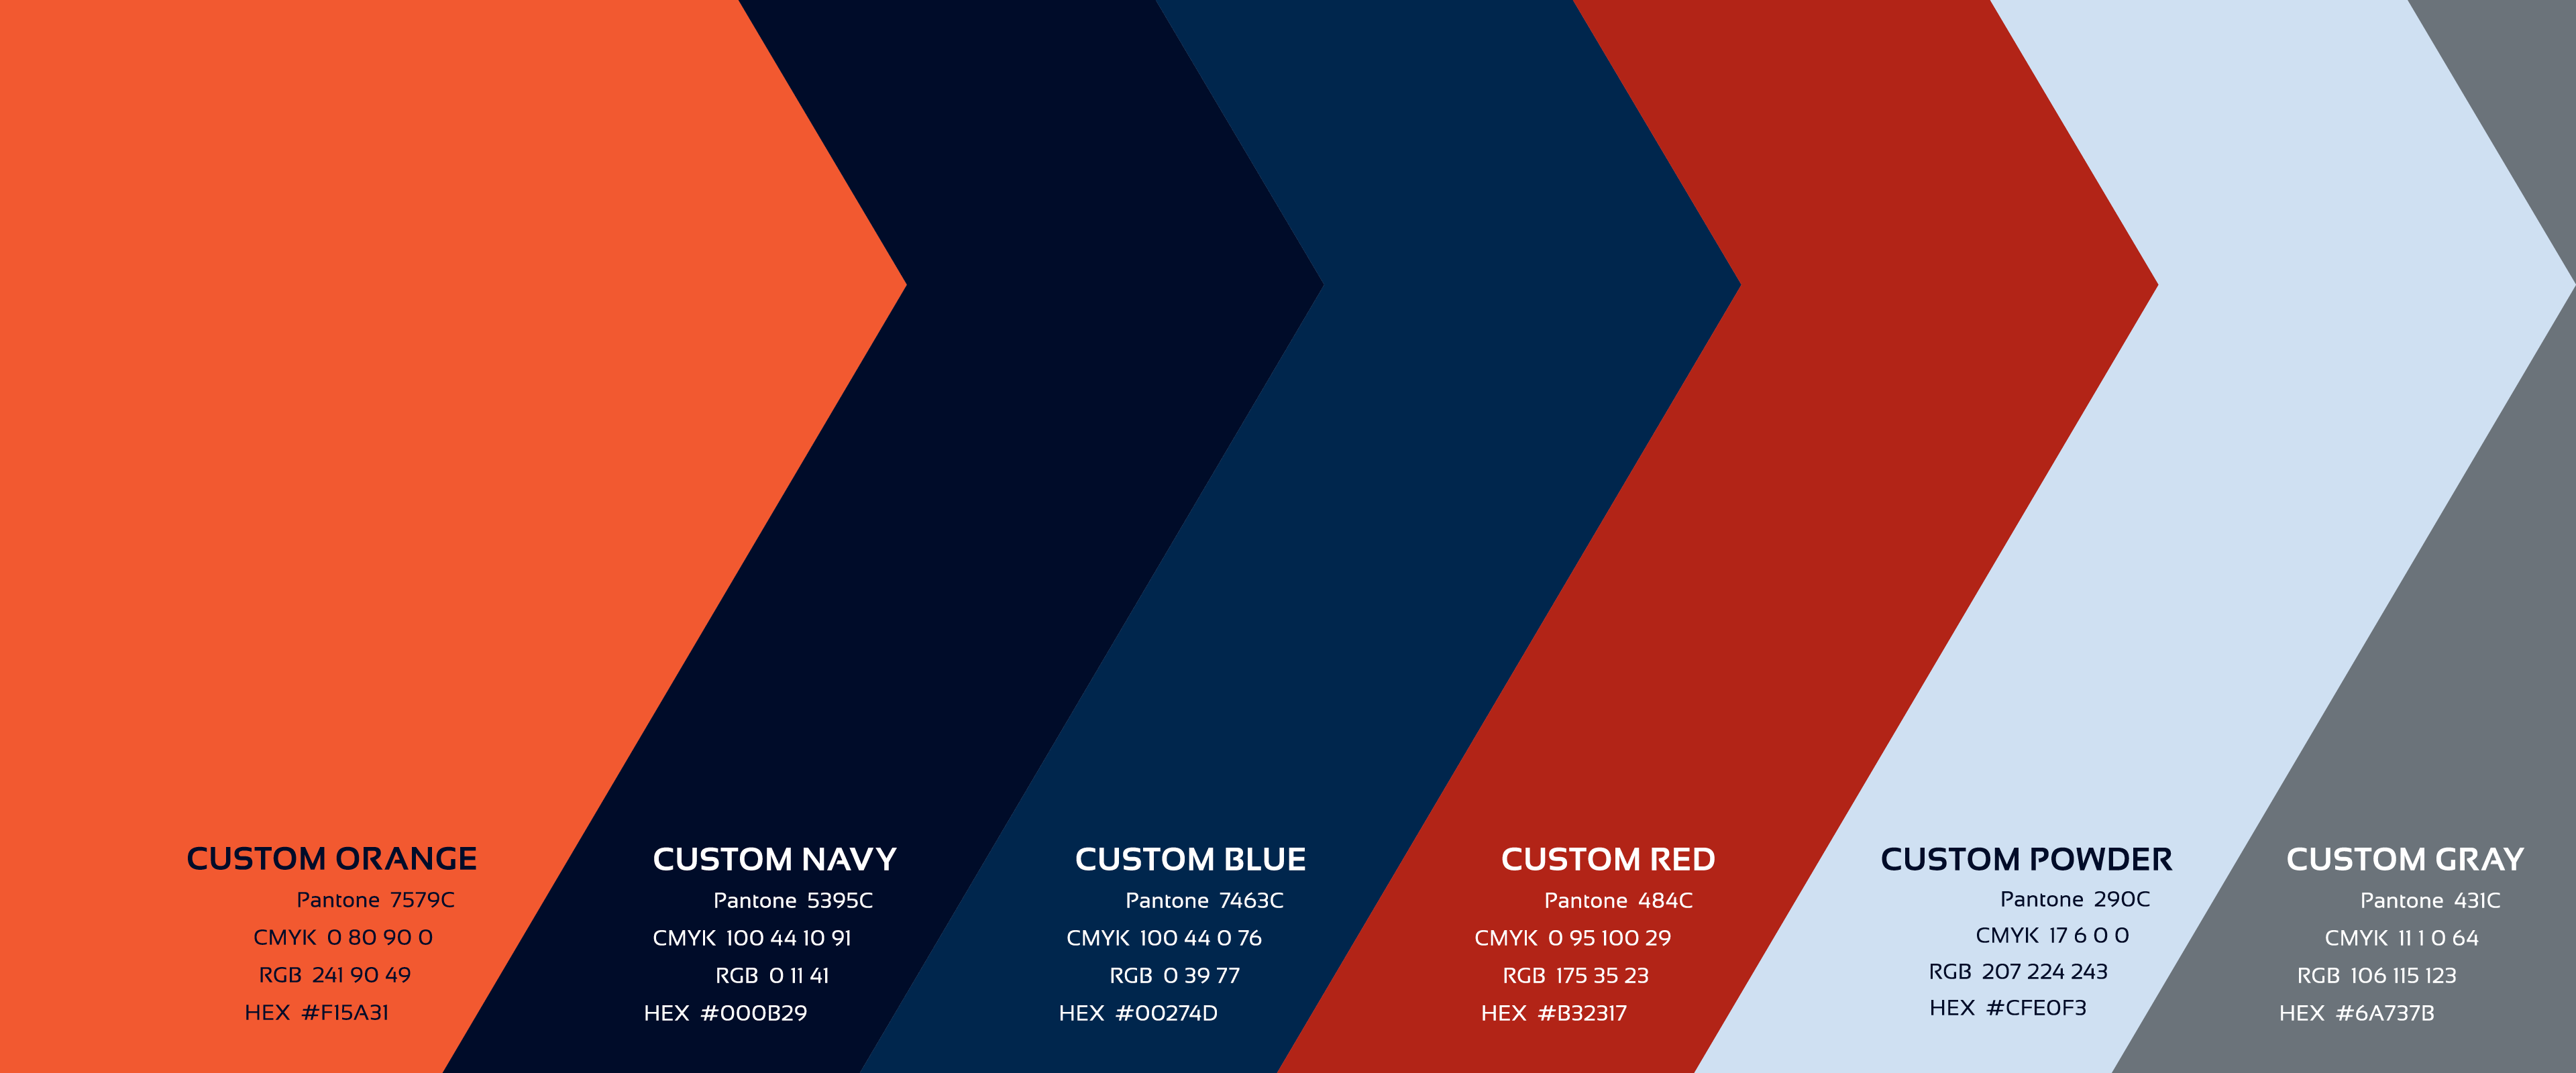 The Custom Cap and Tire brand features a color scheme with orange, various blue hues, a red and gray.